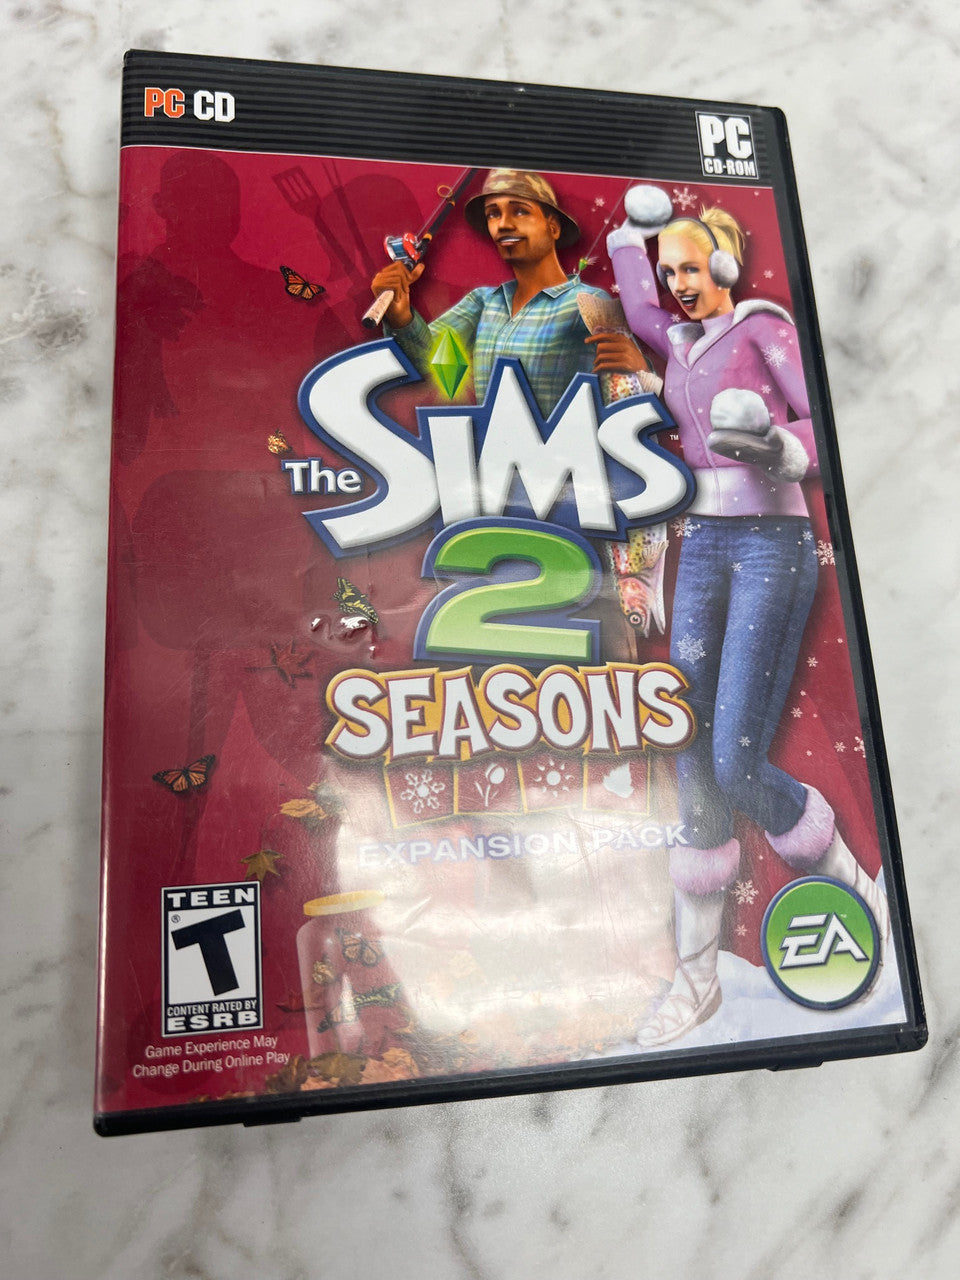 The Sims 2 Seasons PC Game Expansion Pack 2007 Complete